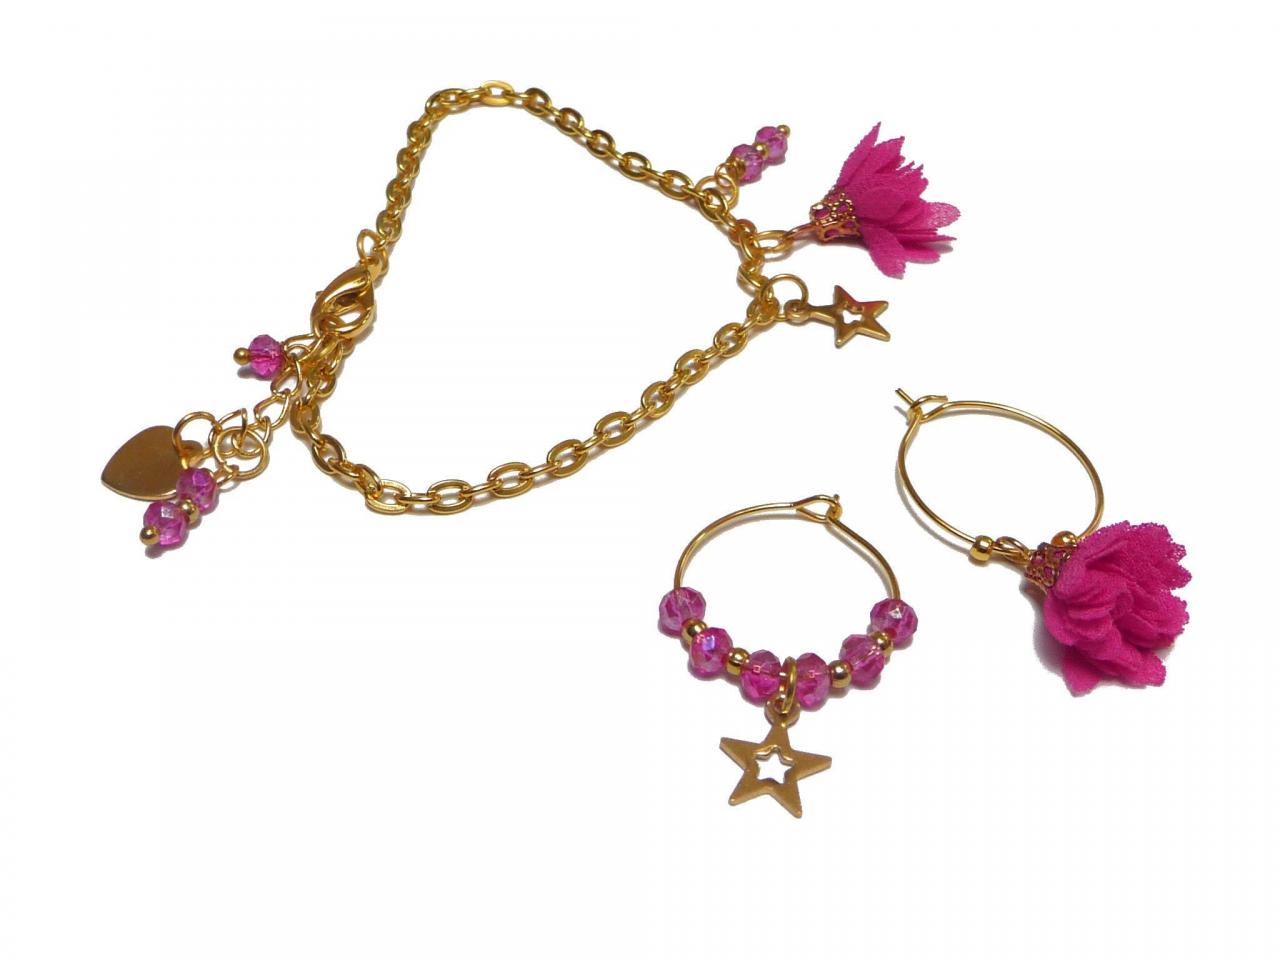 Gold And Pink Earrings And Bracelet Set - Mismatched Hoop Earrings With Star And Flower Charms - Personalized Gift For Your Sister